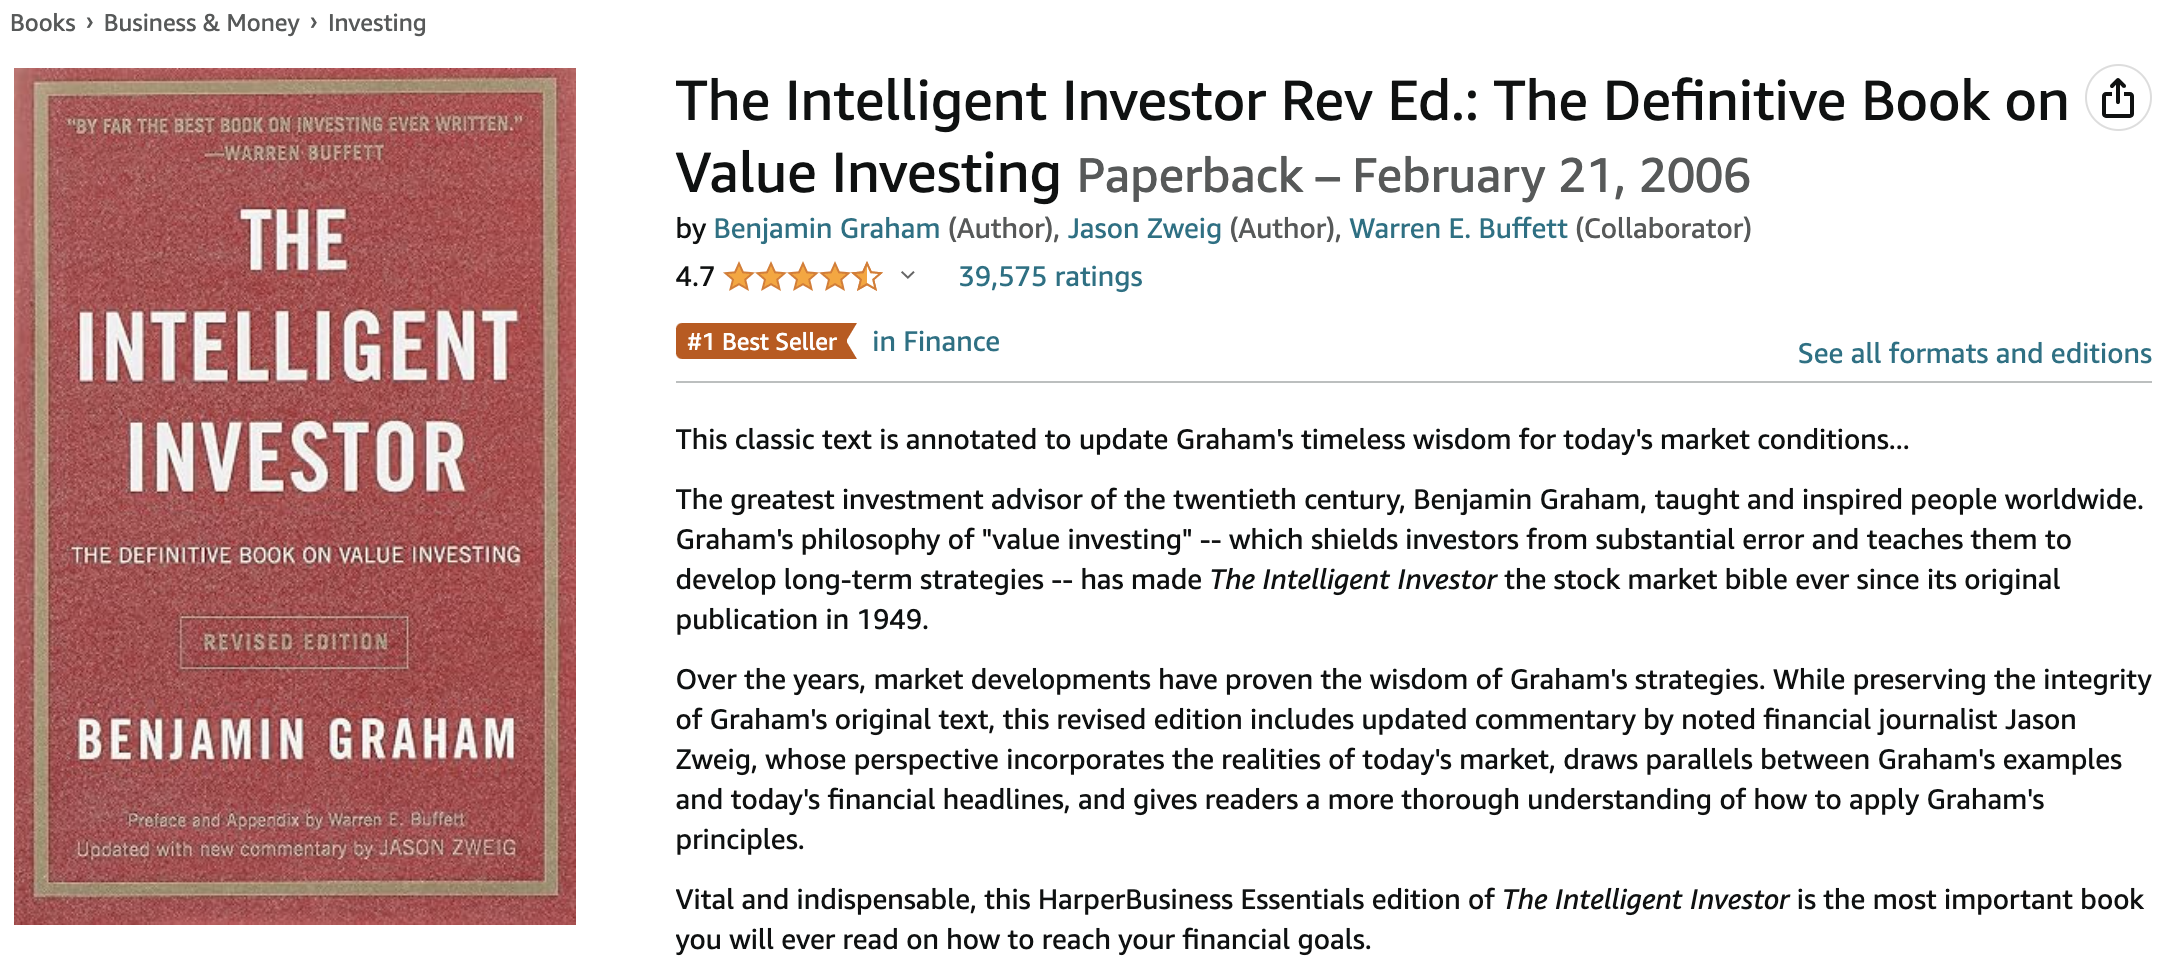 Books for Stock Traders: “The Intelligent Investor” by Benjamin Graham